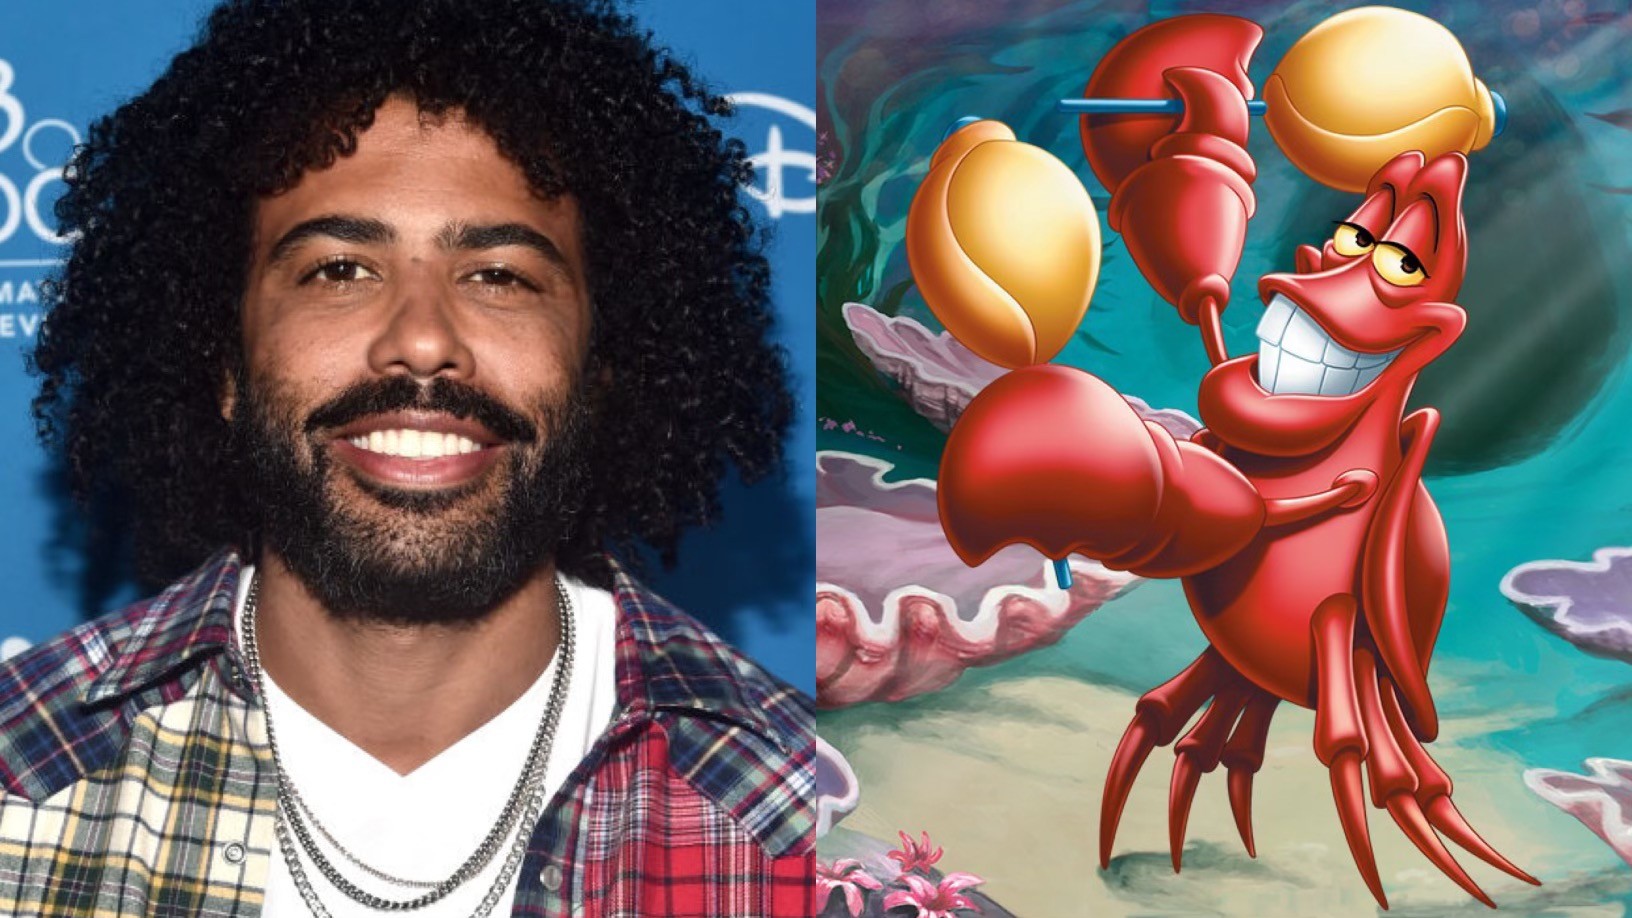 Daveed Diggs on Playing Sebastian in 'The Little Mermaid' The DisInsider